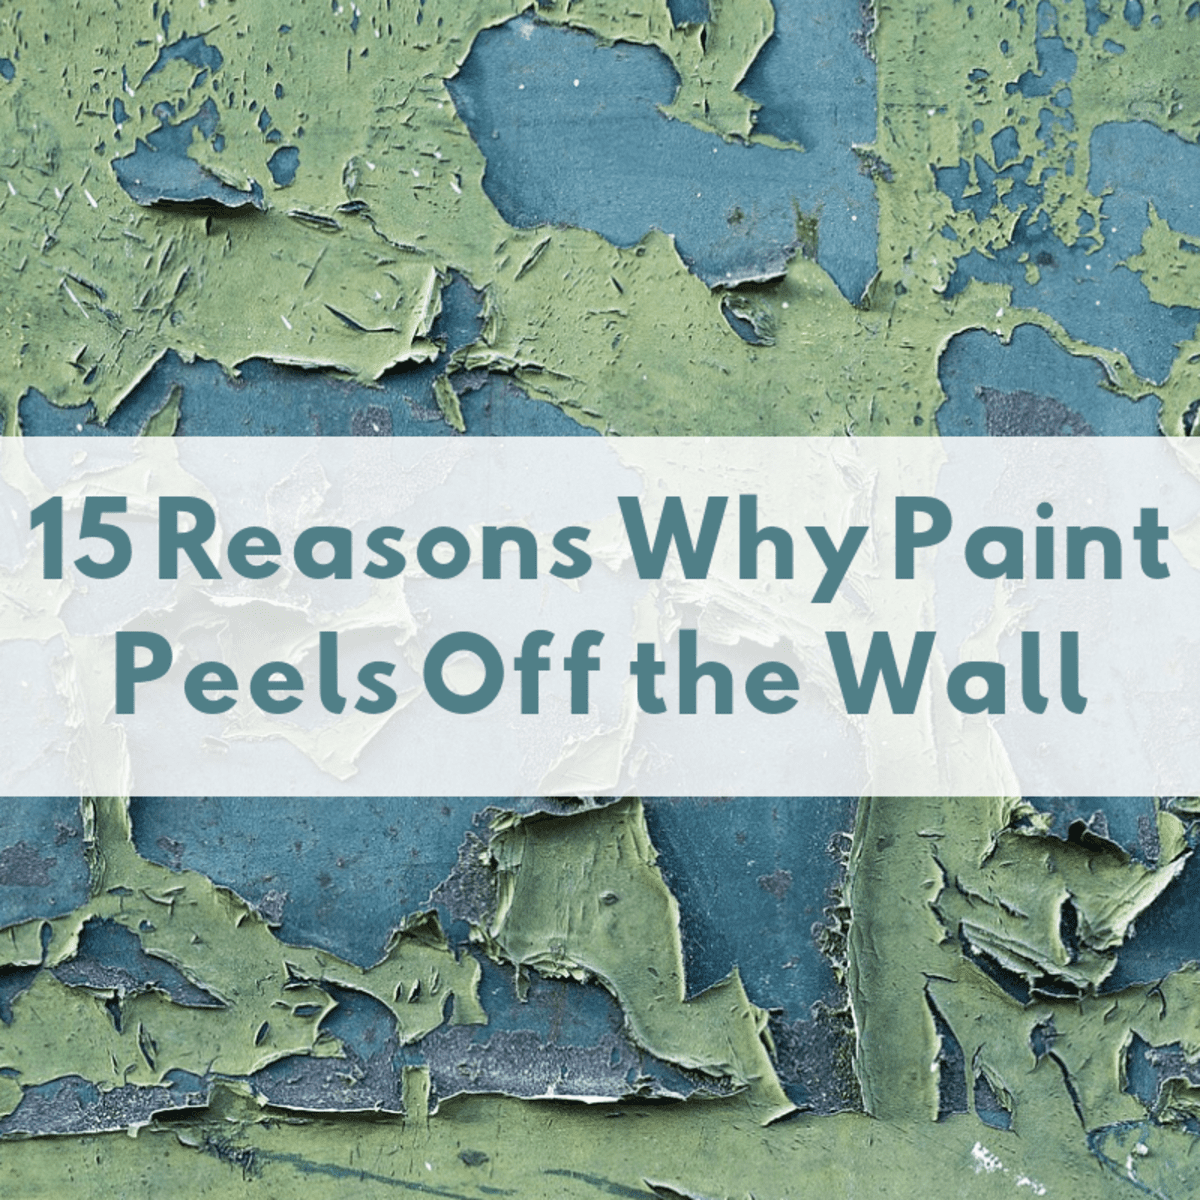 Ling Paint On Walls And Ceilings, How To Remove Chipped Paint From Bathtub